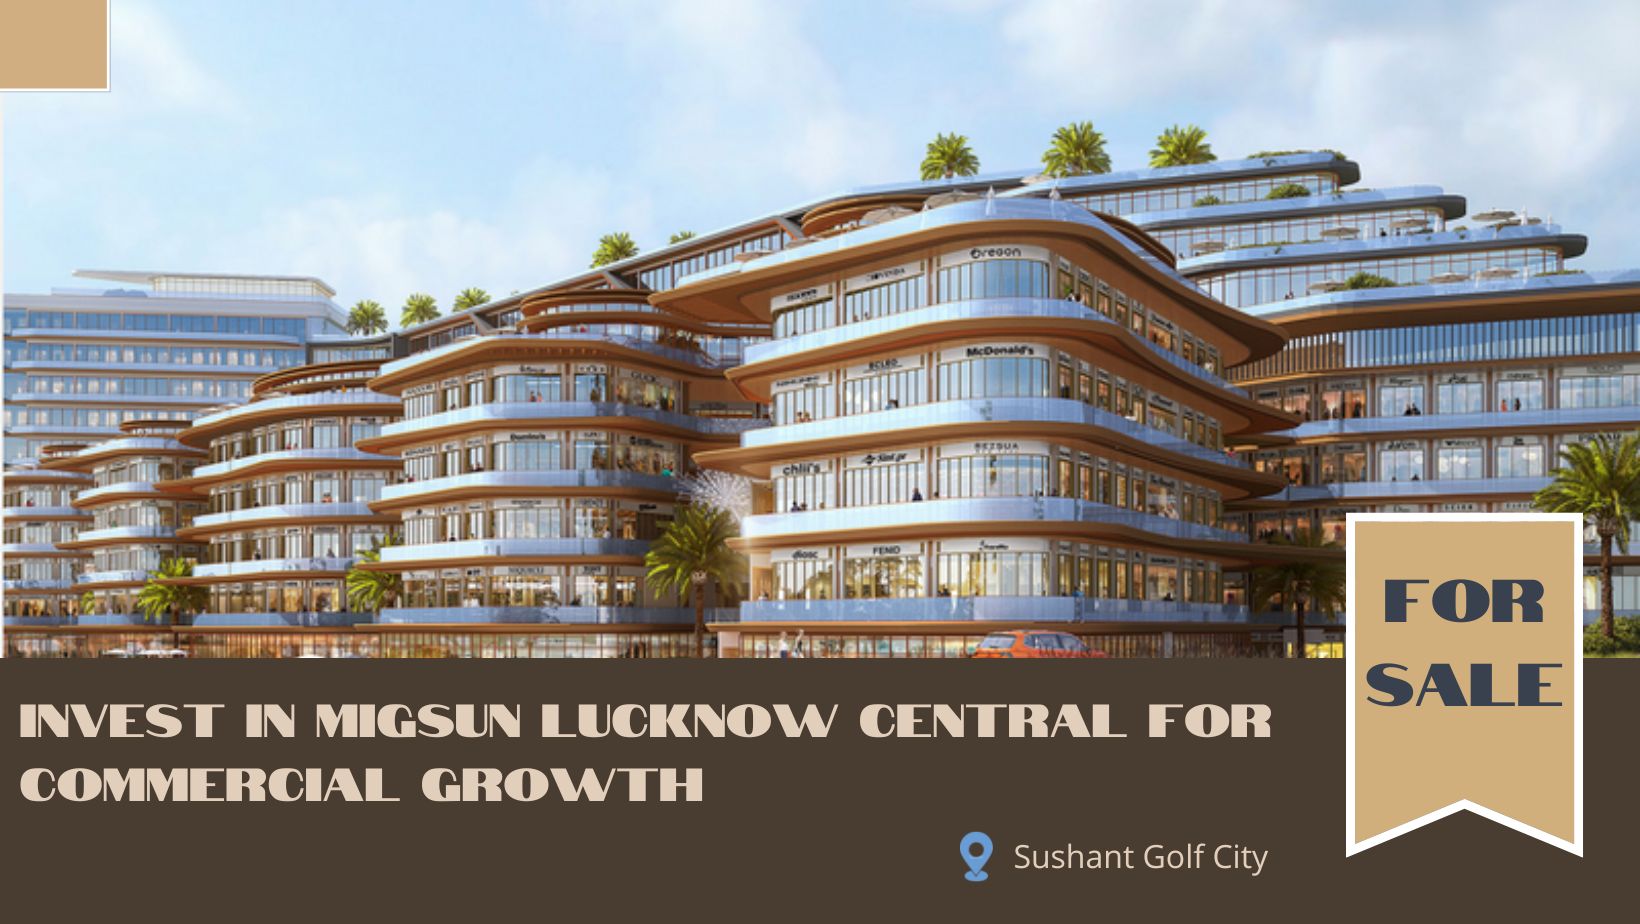 Invest in Migsun Lucknow Central for Commercial Growth